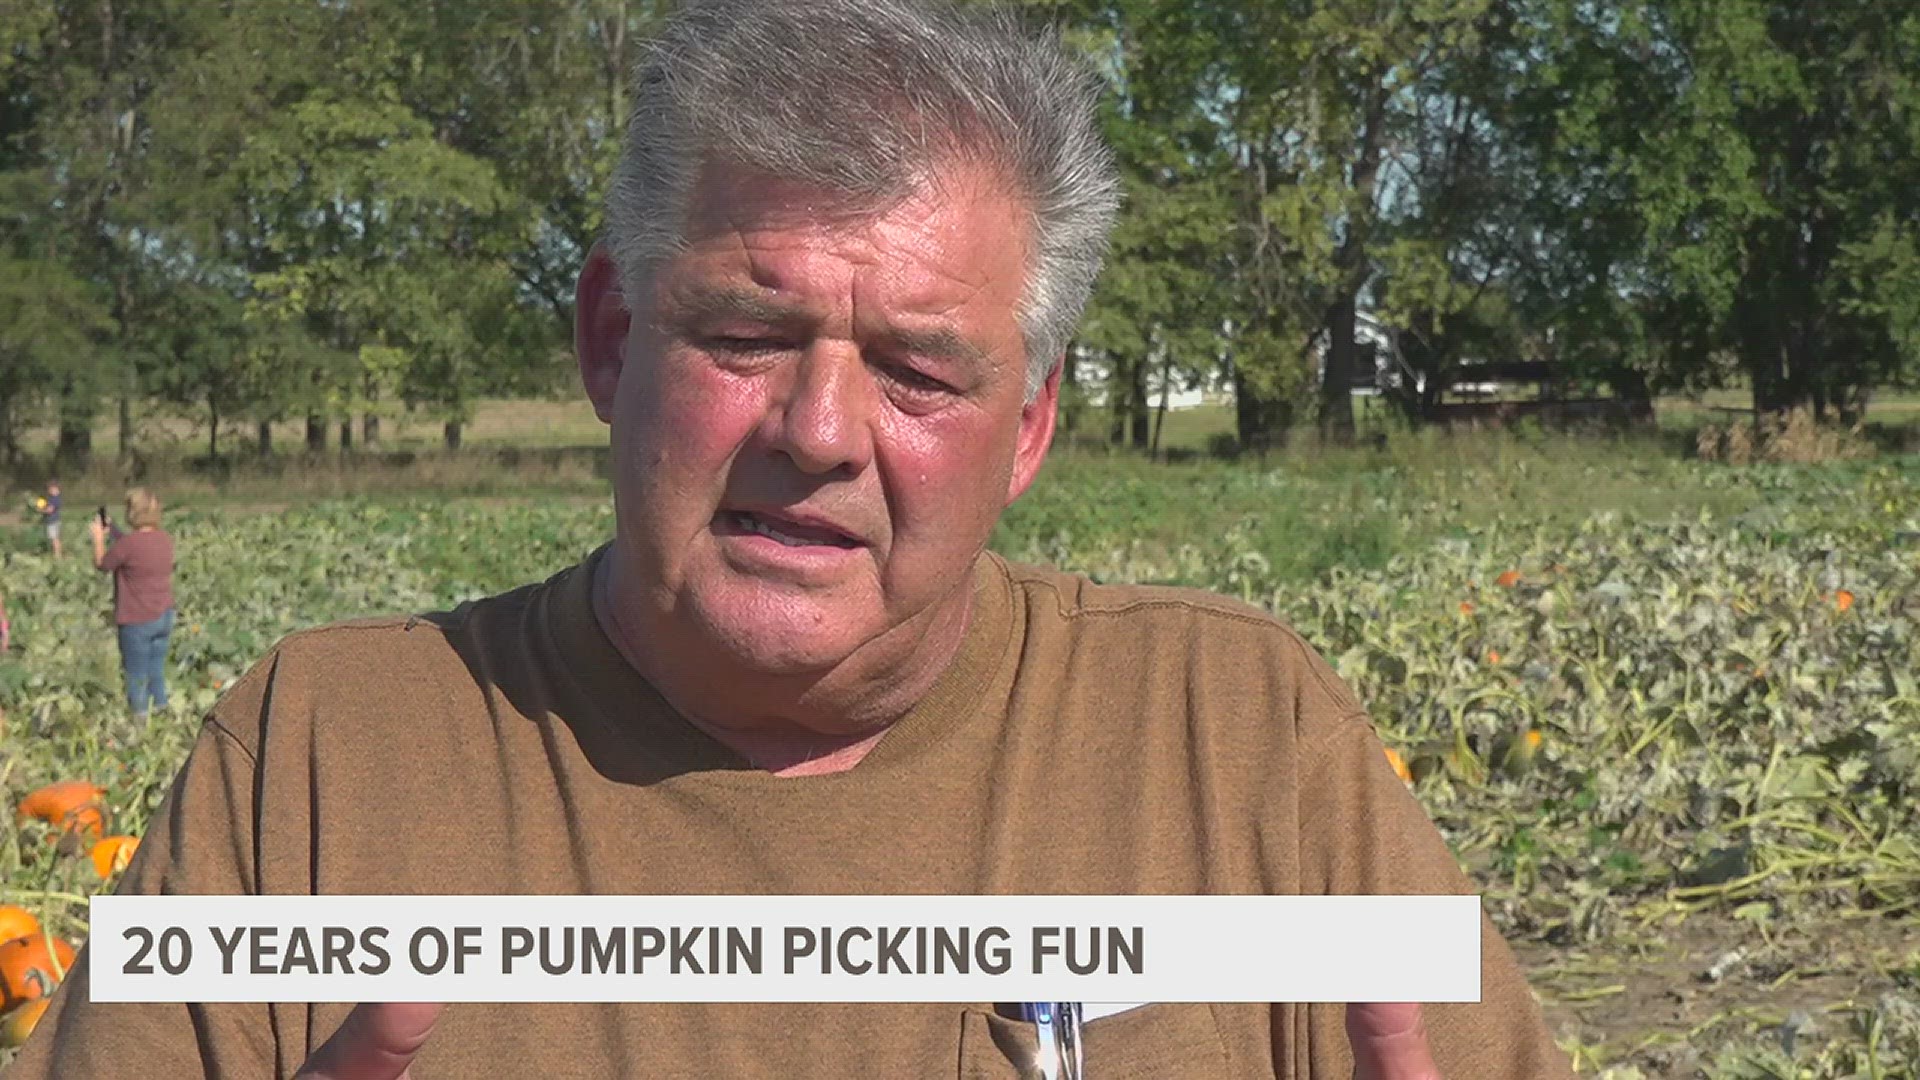 The pumpkin patch is open from 10 a.m. to 5 p.m. from Thursday to Sunday.